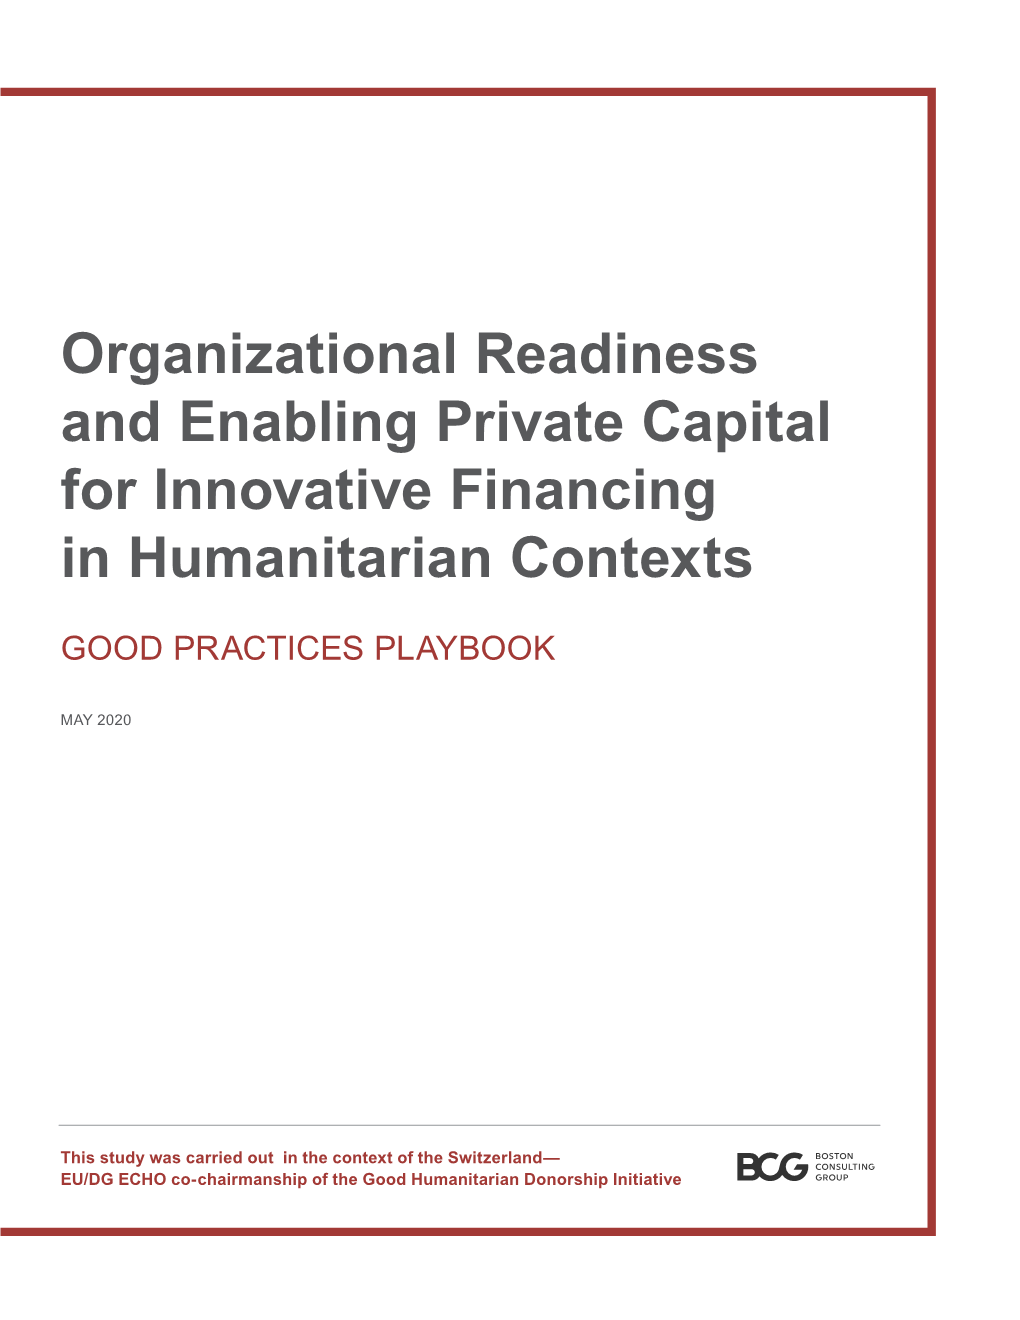 Organizational Readiness and Enabling Private Capital for Innovative Financing in Humanitarian Contexts